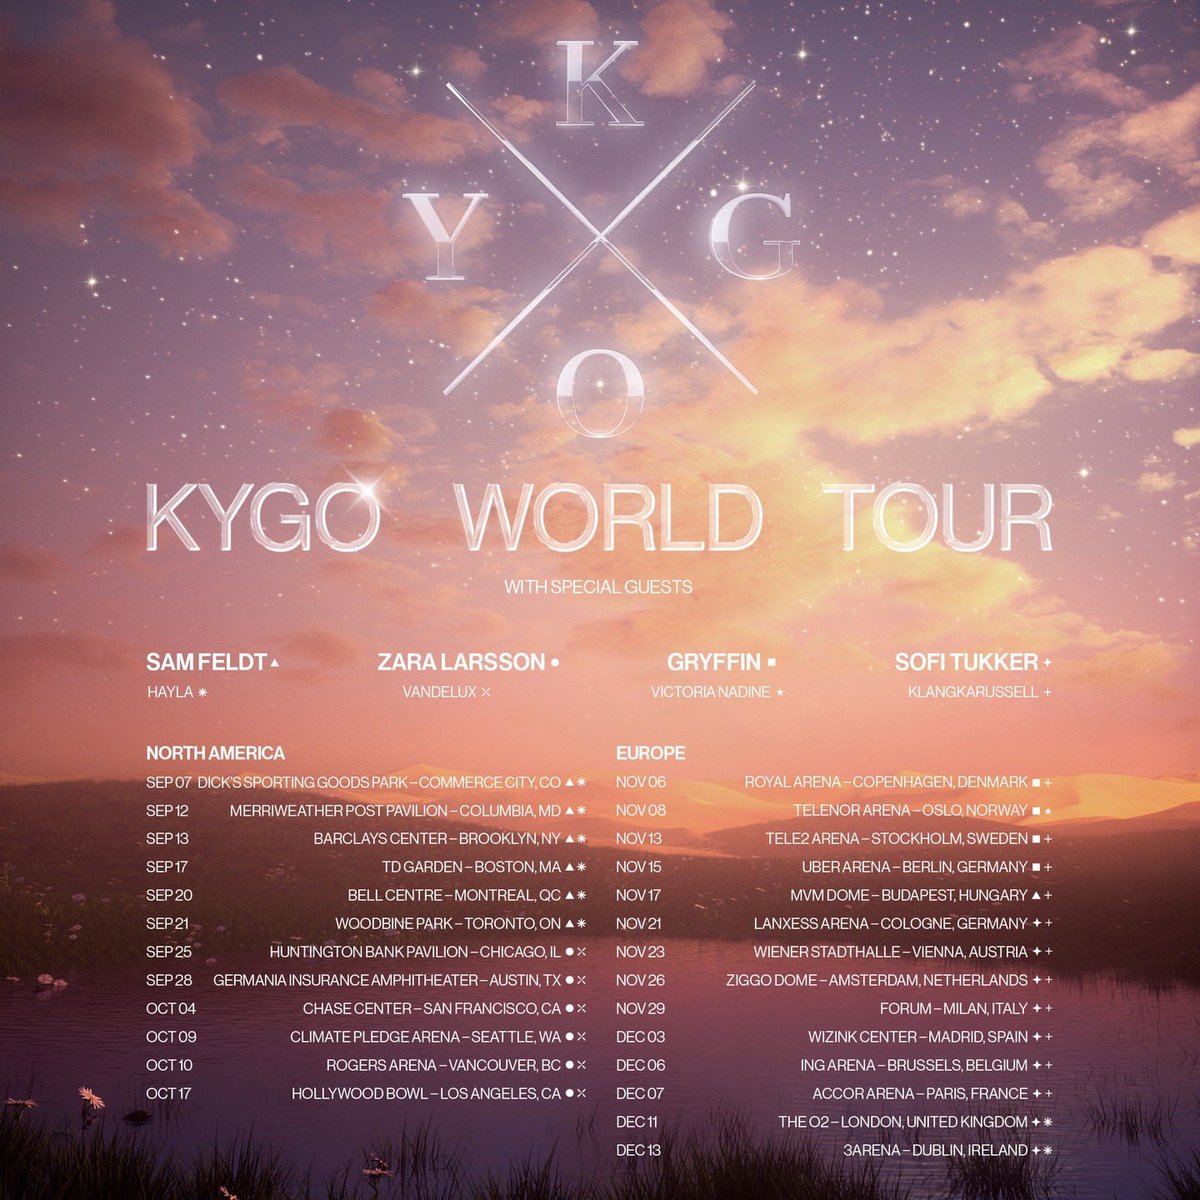 Part One of the Kygo World Tour pre-sale starts tomorrow (4/24) at 10am local!! Don't miss this one 🎟

Use code KYGO24 to get your tickets at kygothealbum.com